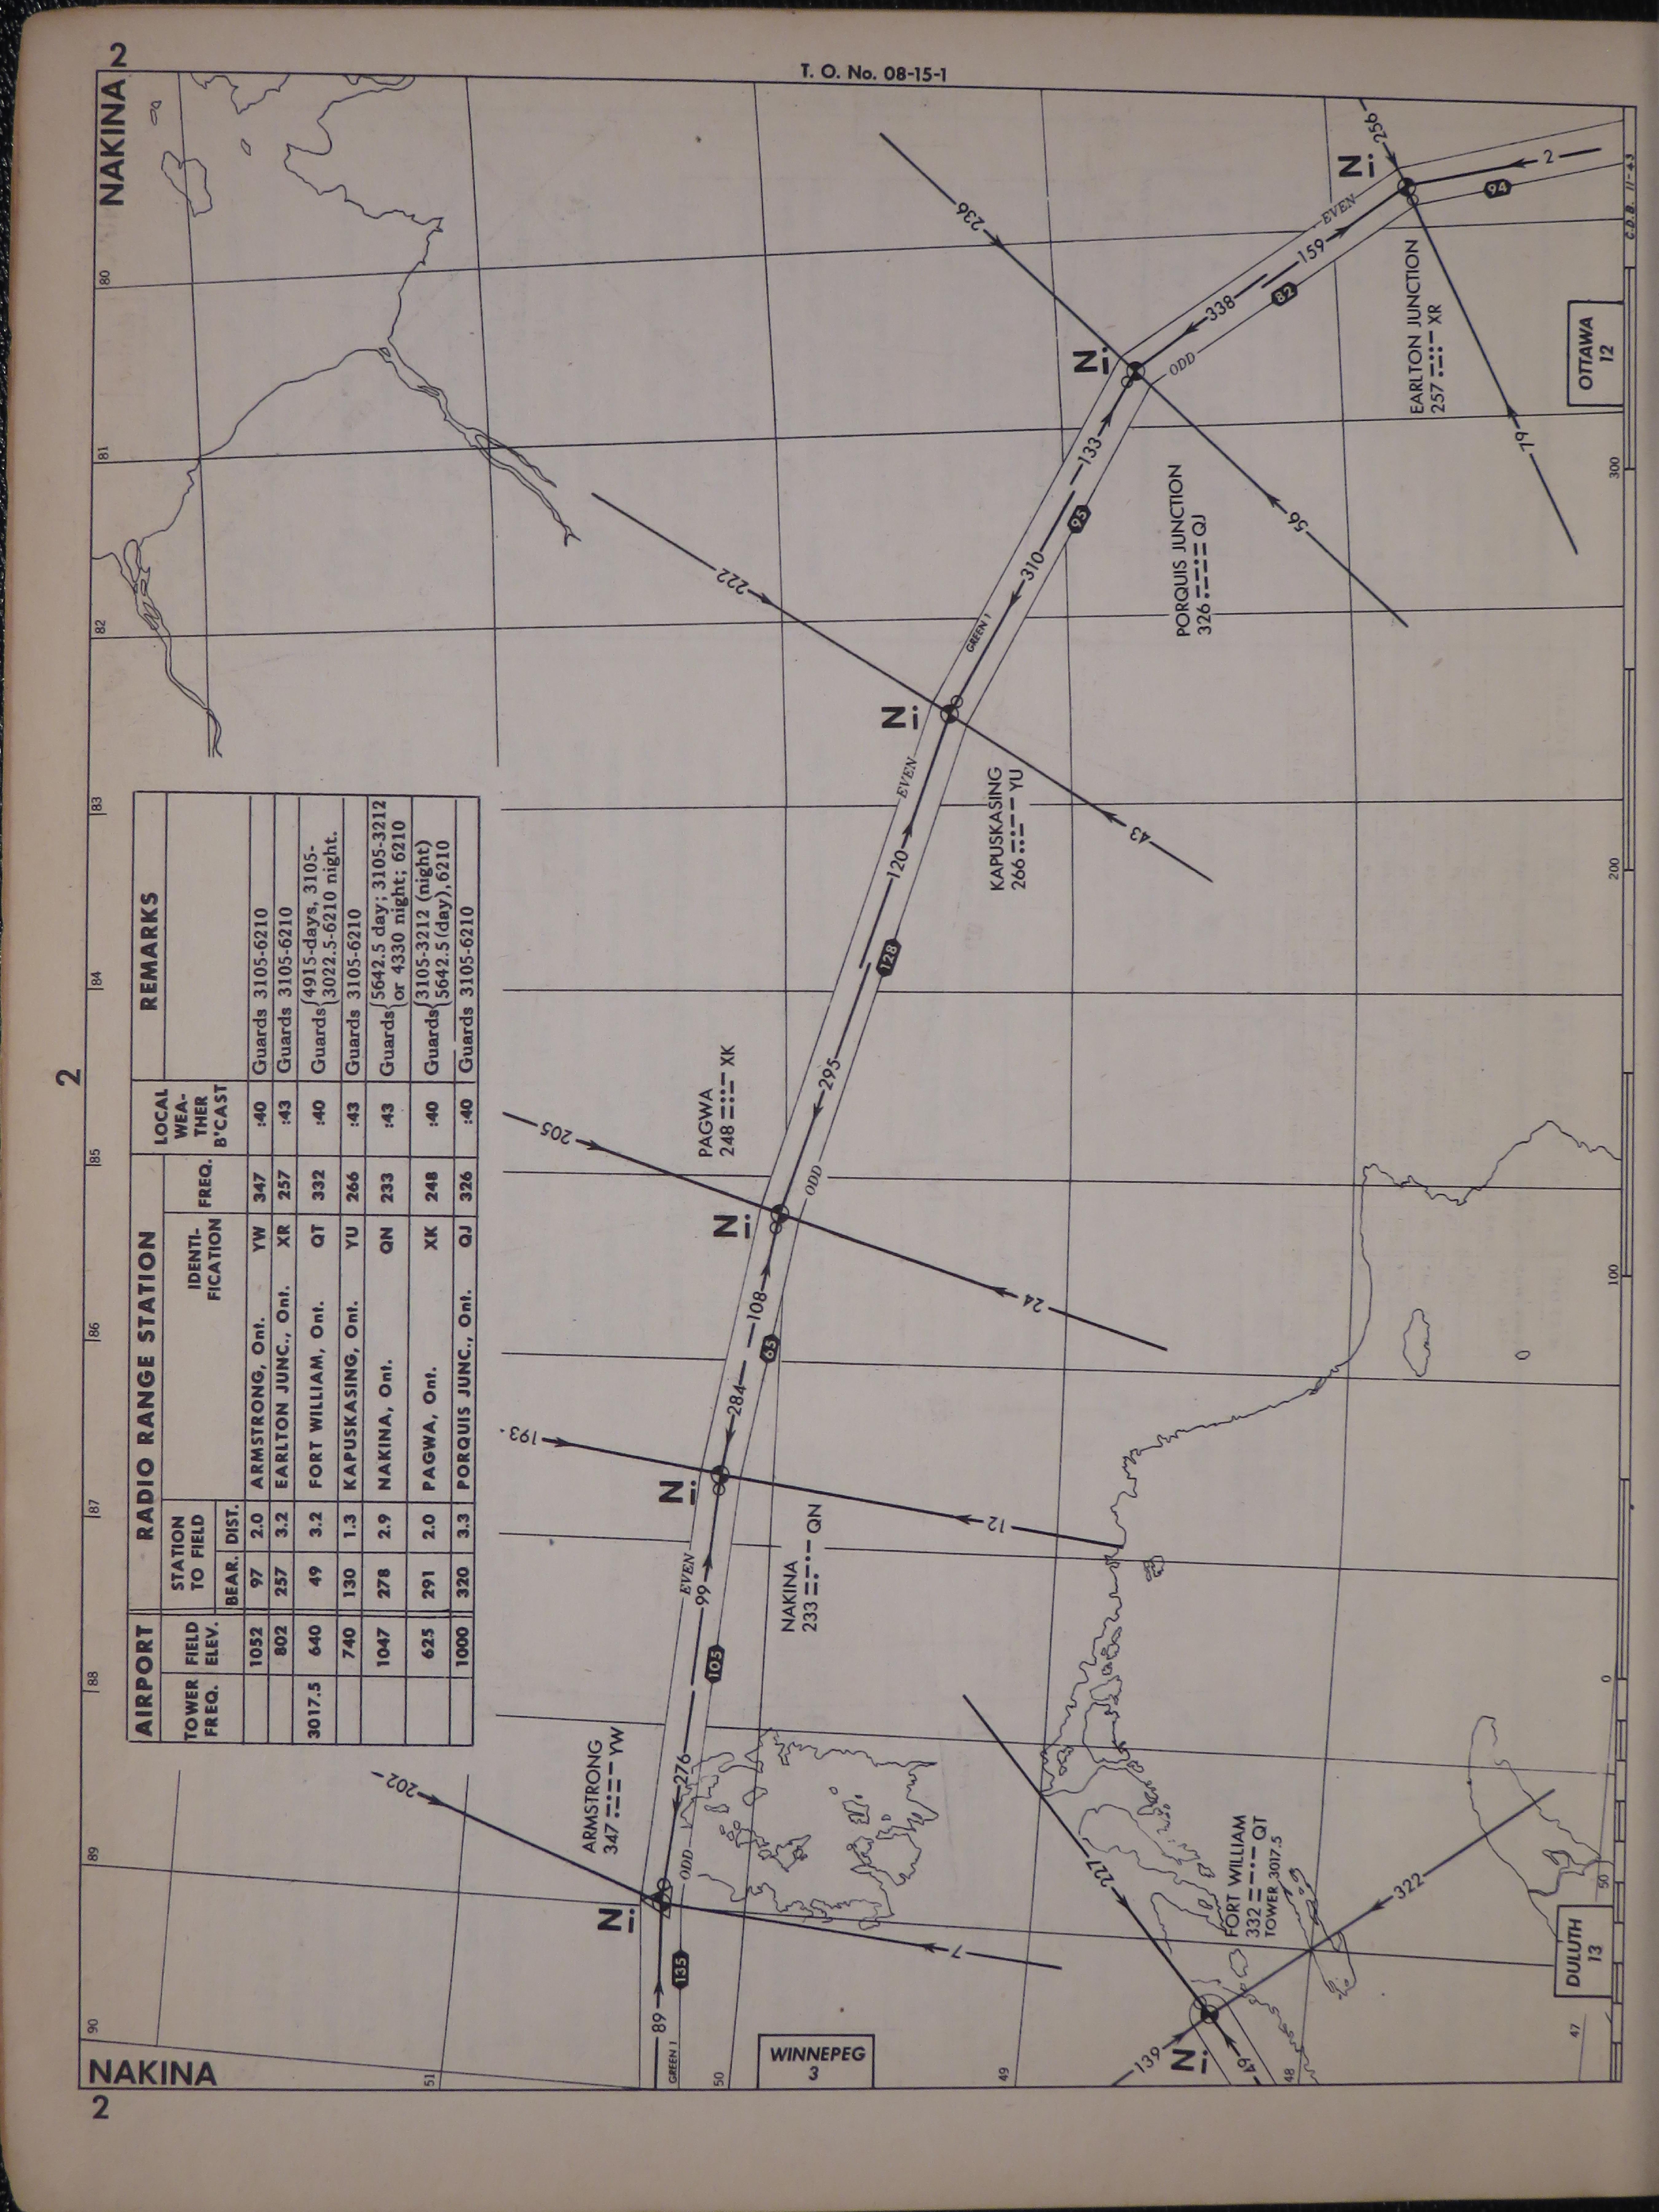 Sample page 6 from AirCorps Library document: Army Air Forces Radio Facility Charts